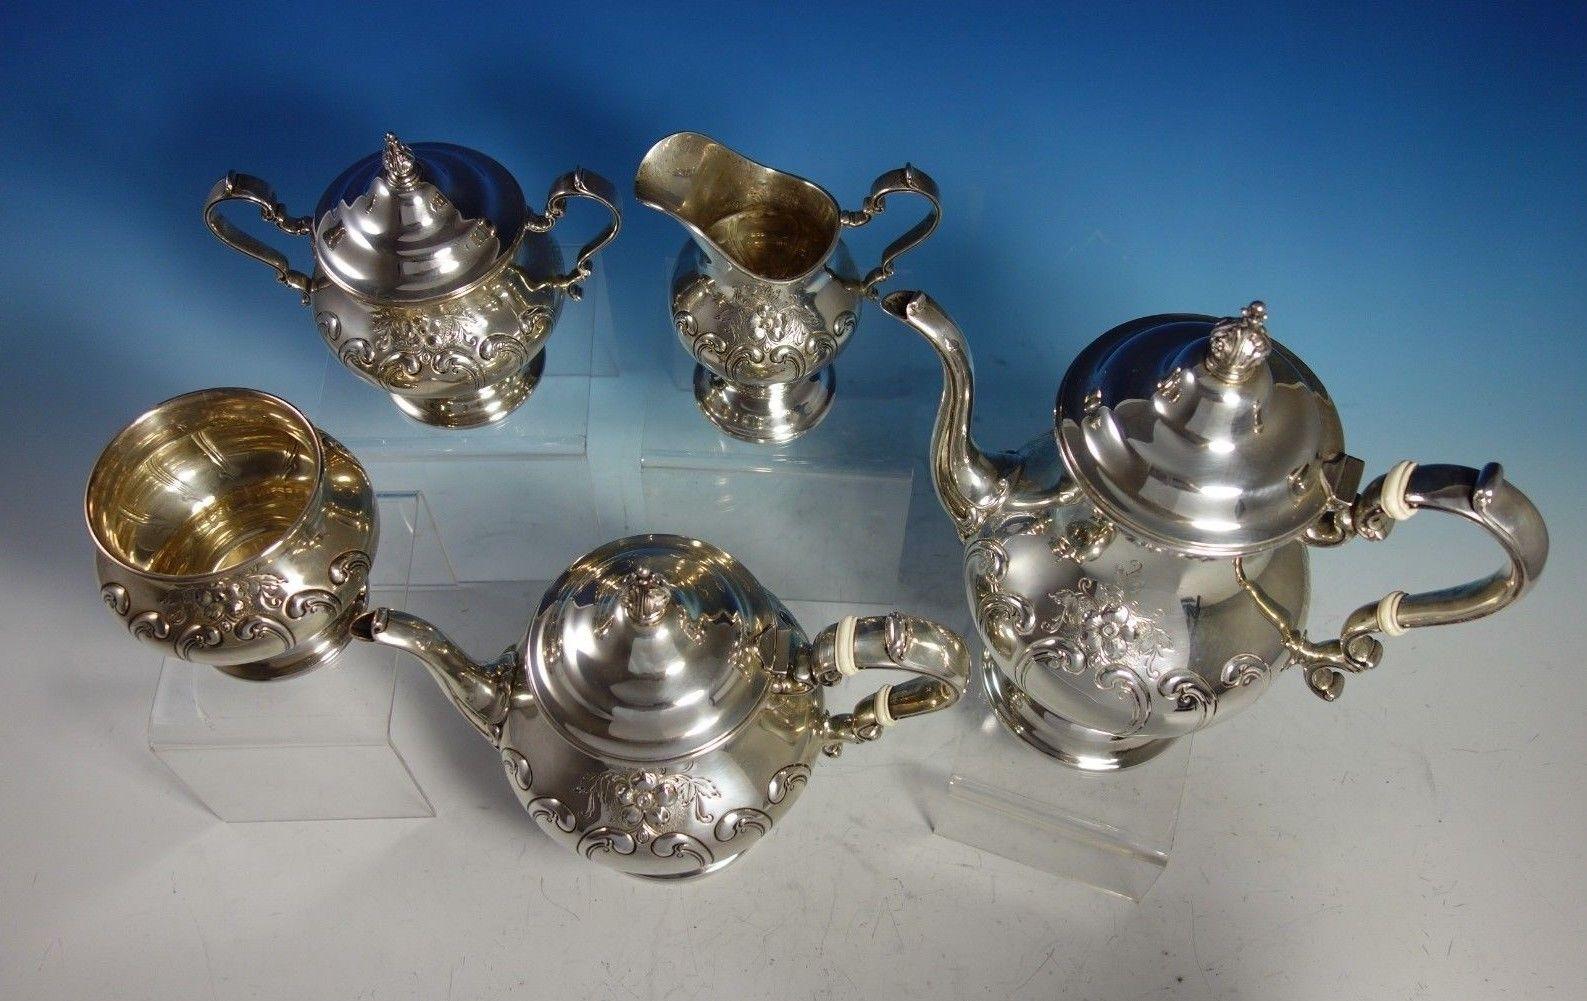 Beautiful Chantilly Countess by Gorham sterling silver 5-piece tea set. This set includes:
1 - Coffee Pot: Holds 3 pints, is marked #1001/2, measures 9 3/4